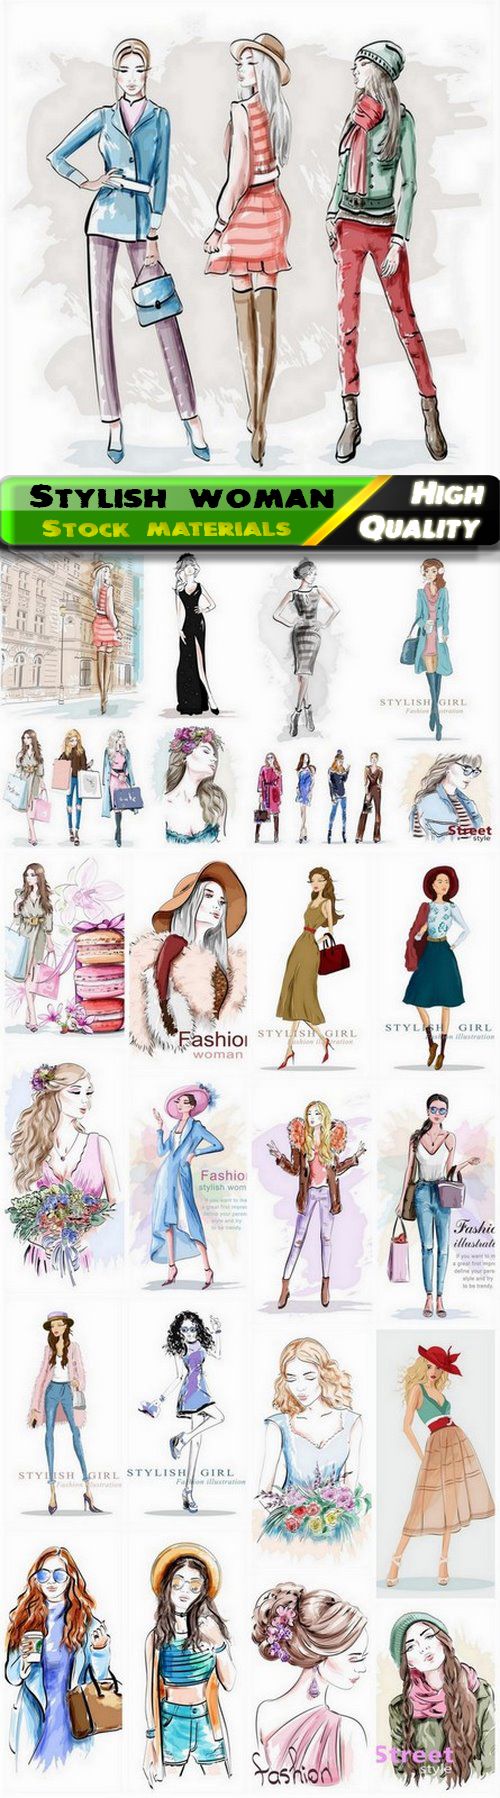 Watercolor fashion sketch of stylish woman and girl 25 Eps